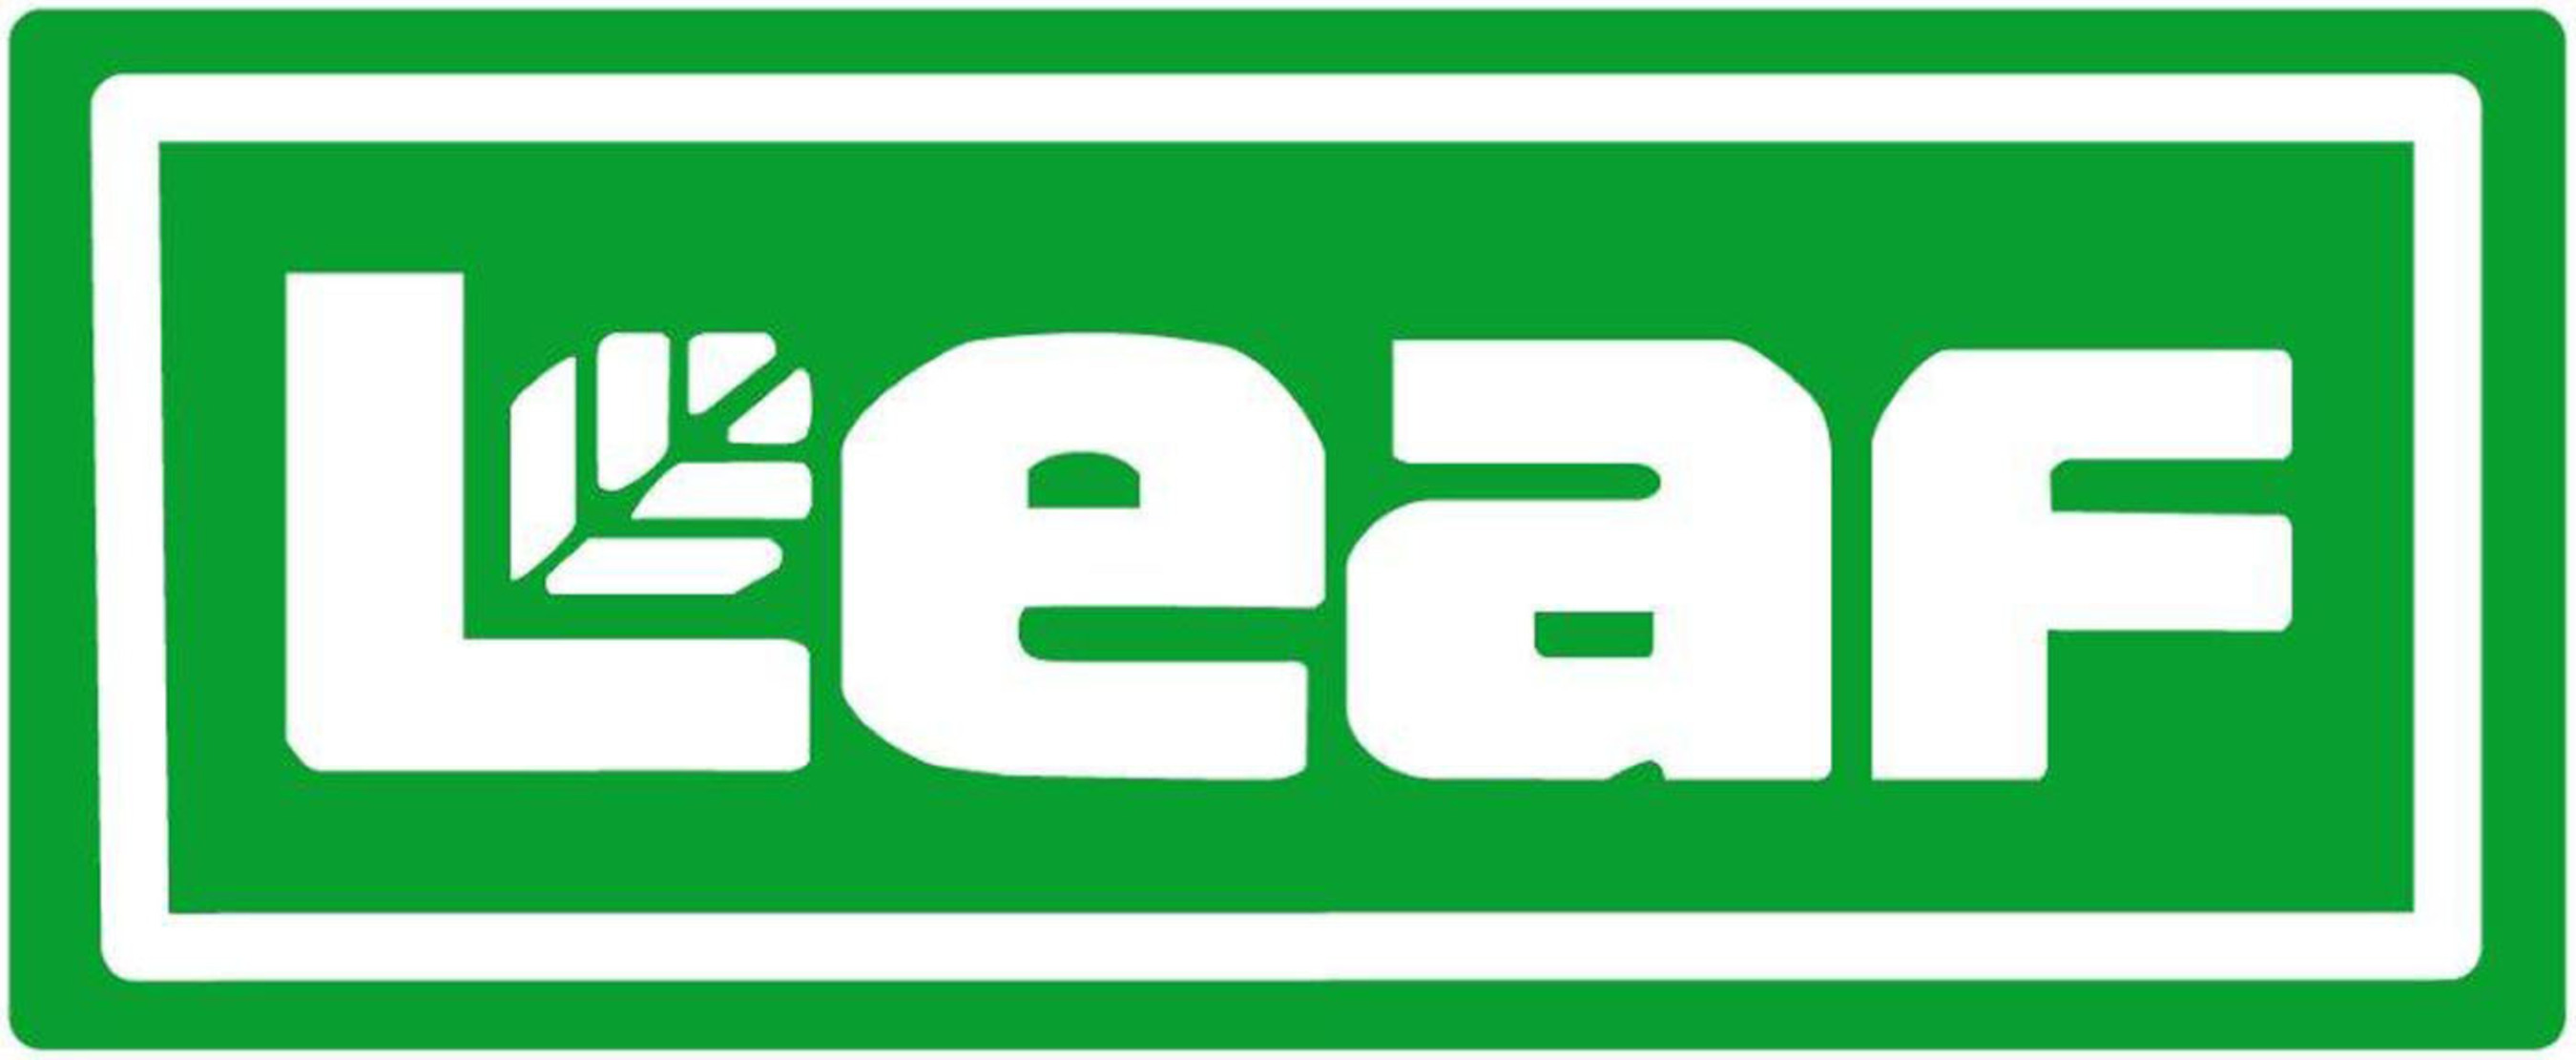 Leaf Brands, LLC, one of the most innovative candy companies in the US. (PRNewsFoto/Leaf Brands, LLC) (PRNewsFoto/LEAF BRANDS, LLC)